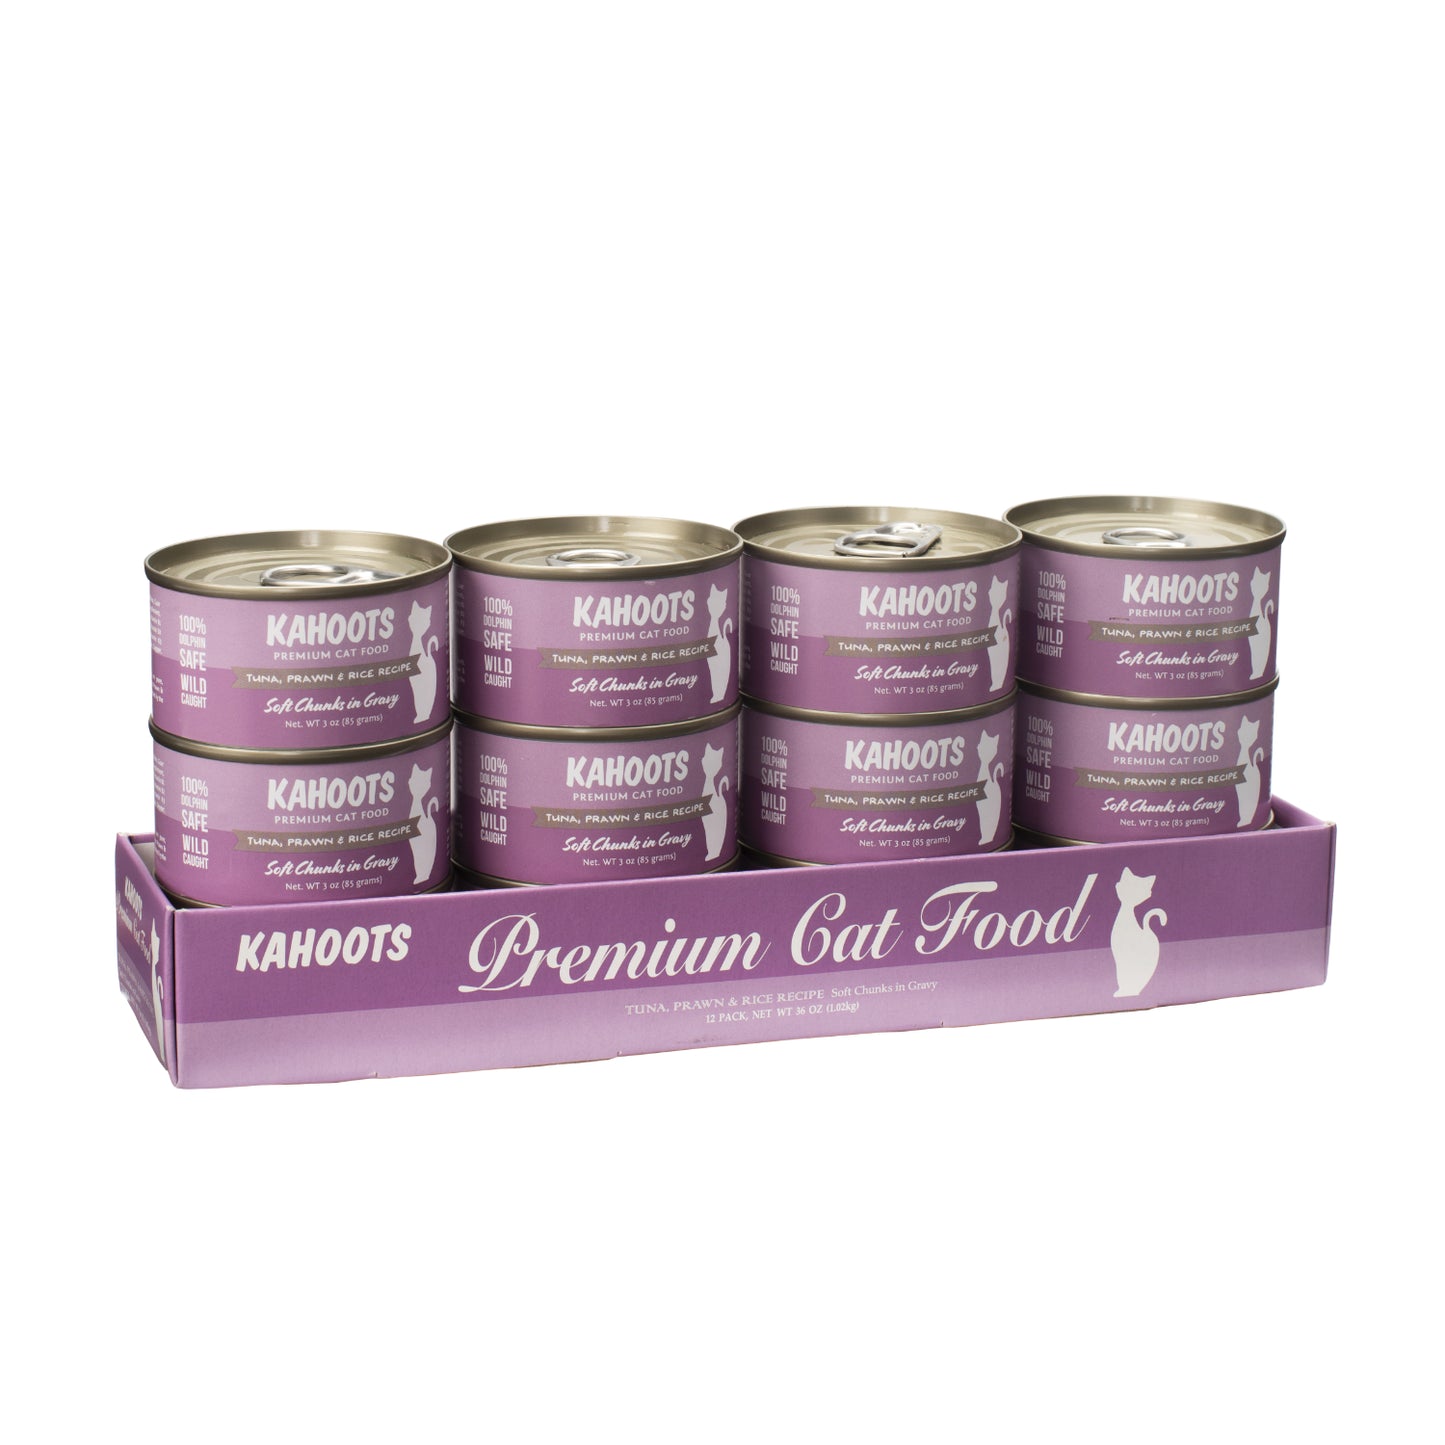 Case quantity of Tuna, prawn, and rice wet cat food. Picture of a white cat over a purple background on label